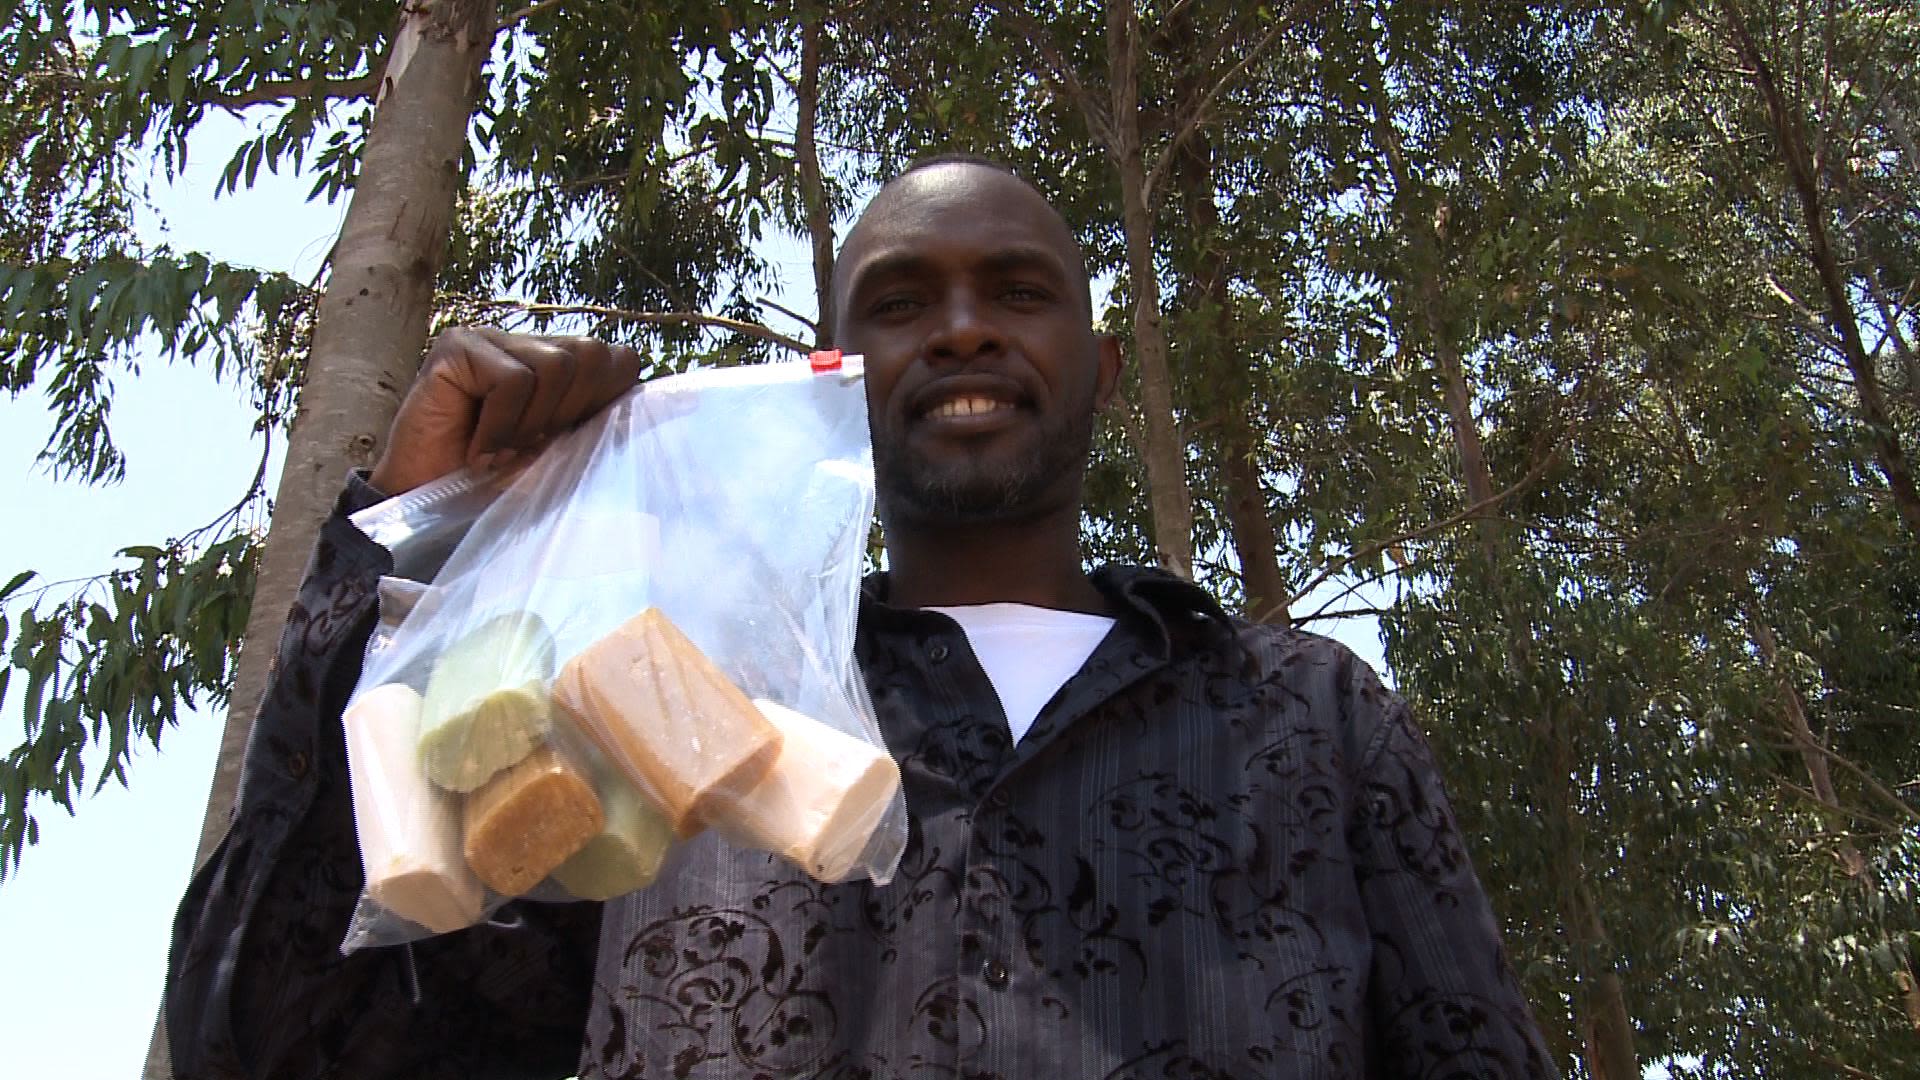 Derreck Kayongo is the creator of the Global Soap Project.